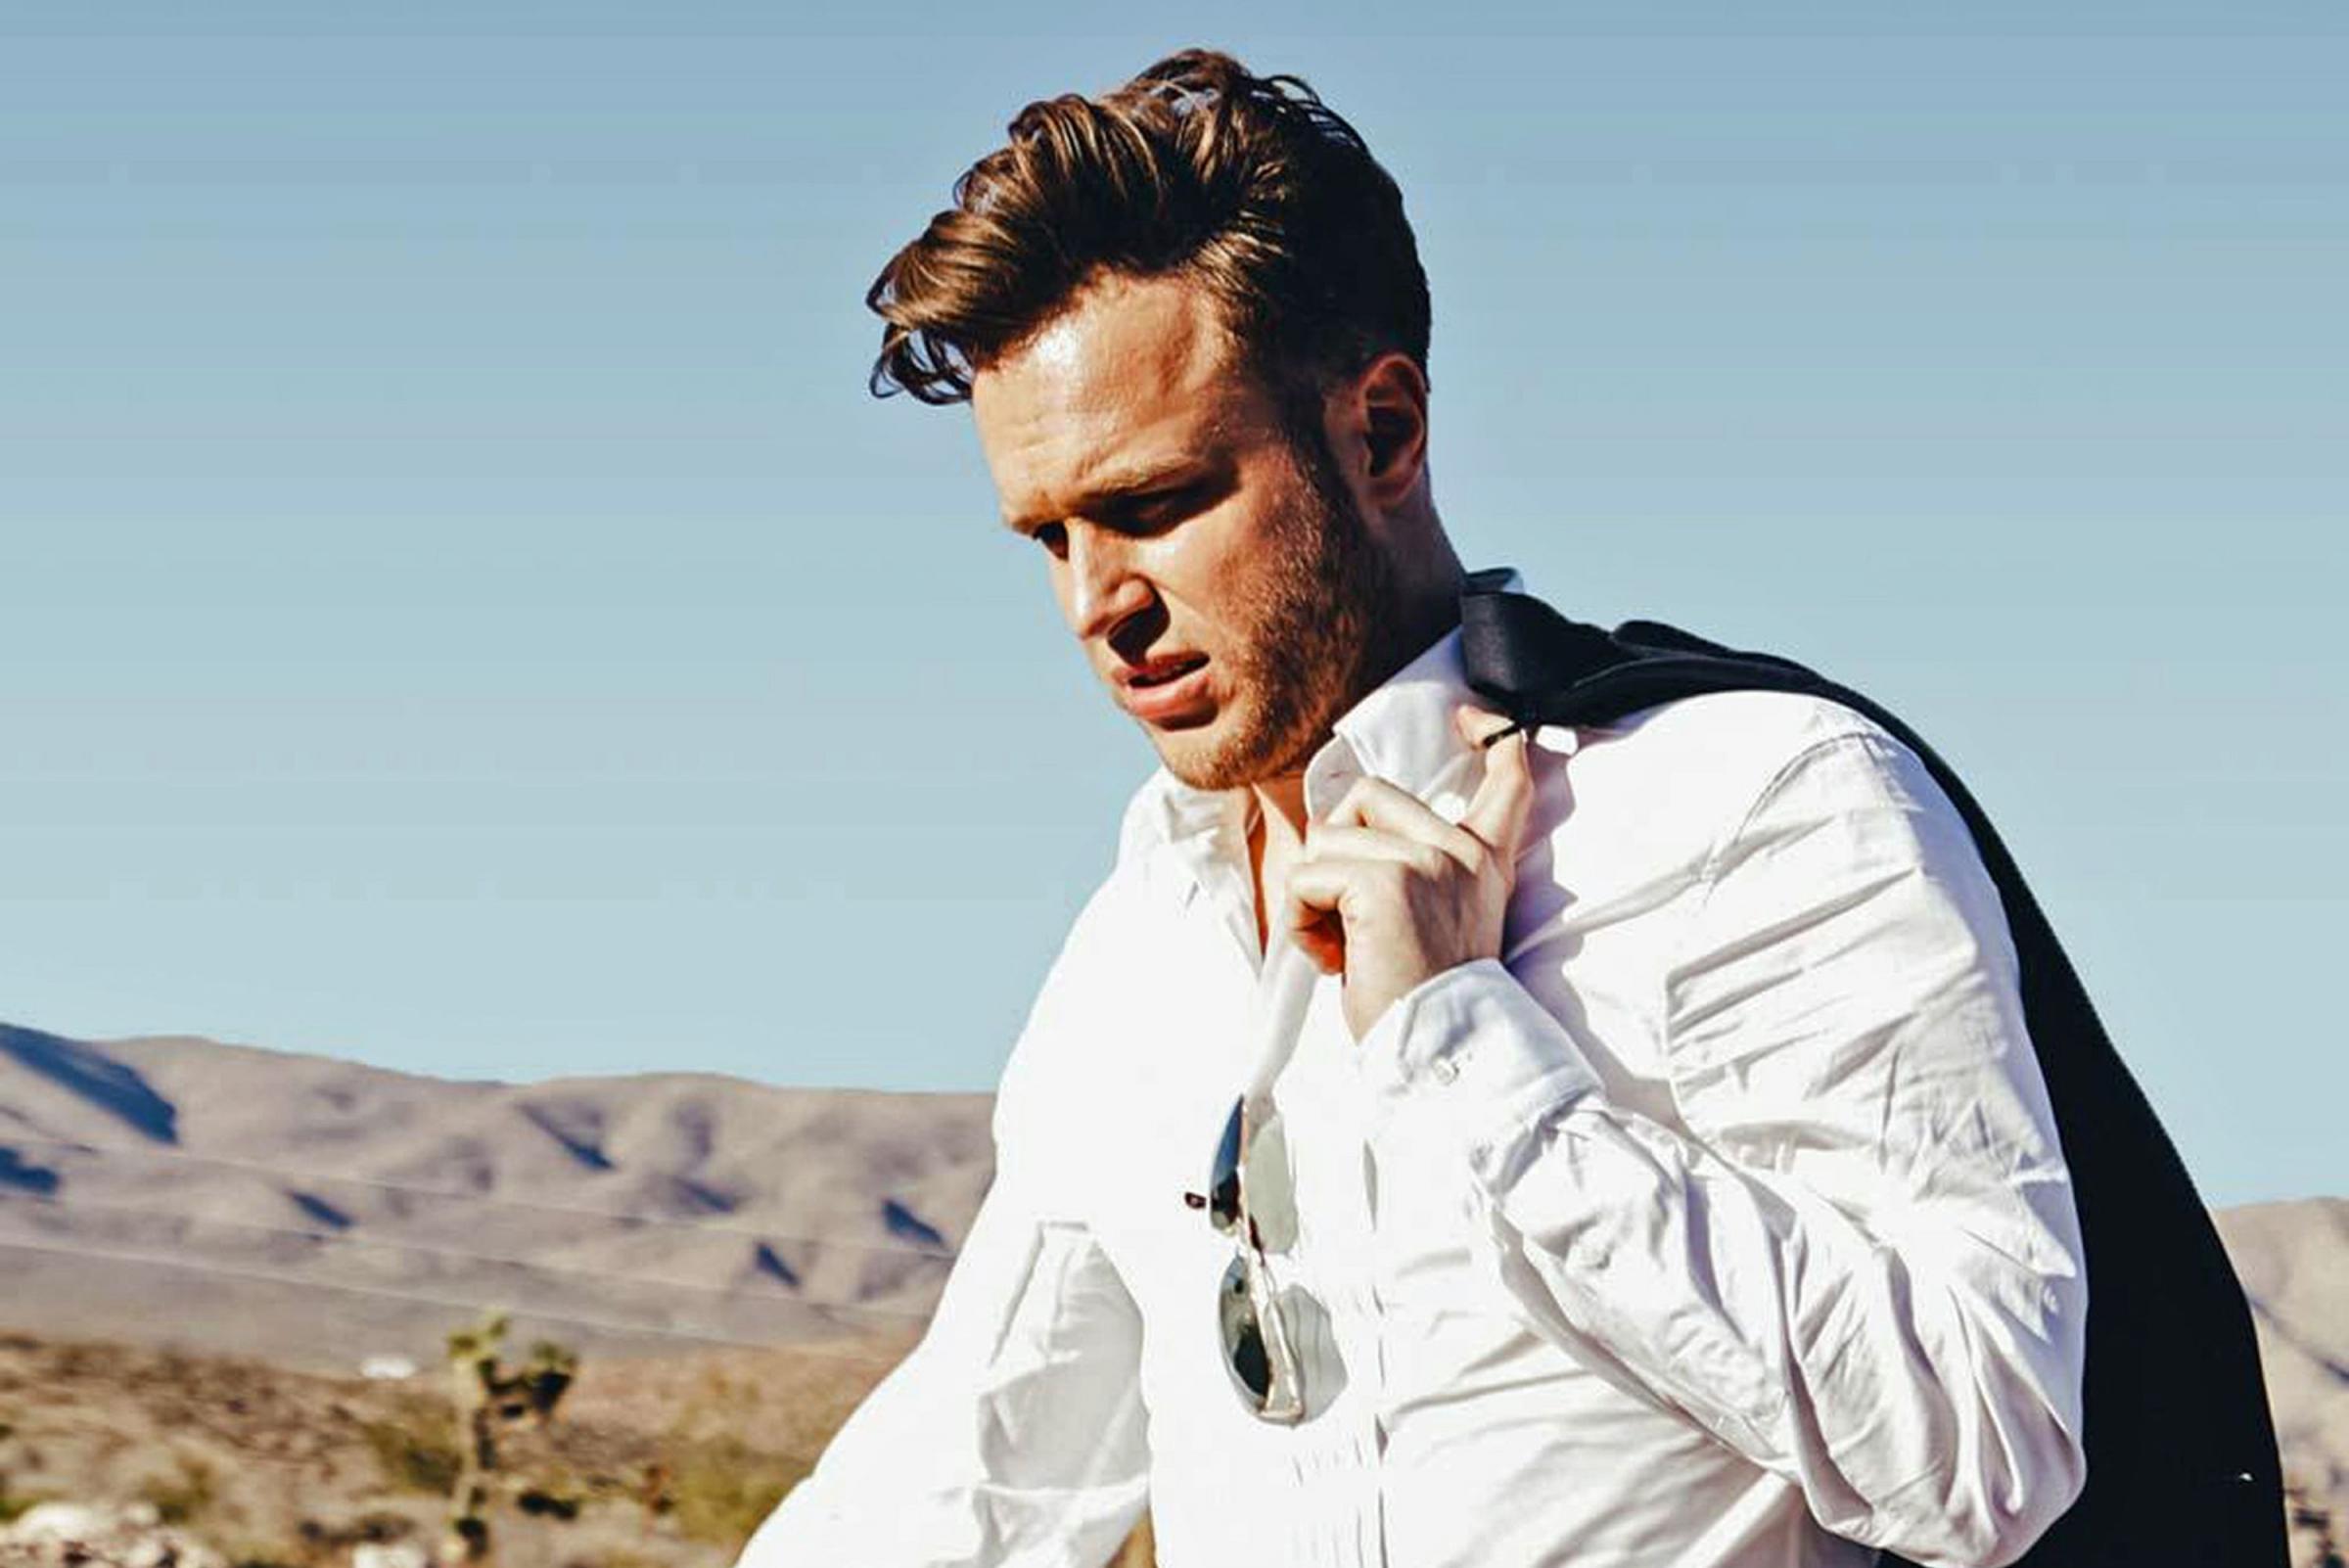 Pop sensation Olly Murs is coming to the Brighton Centre